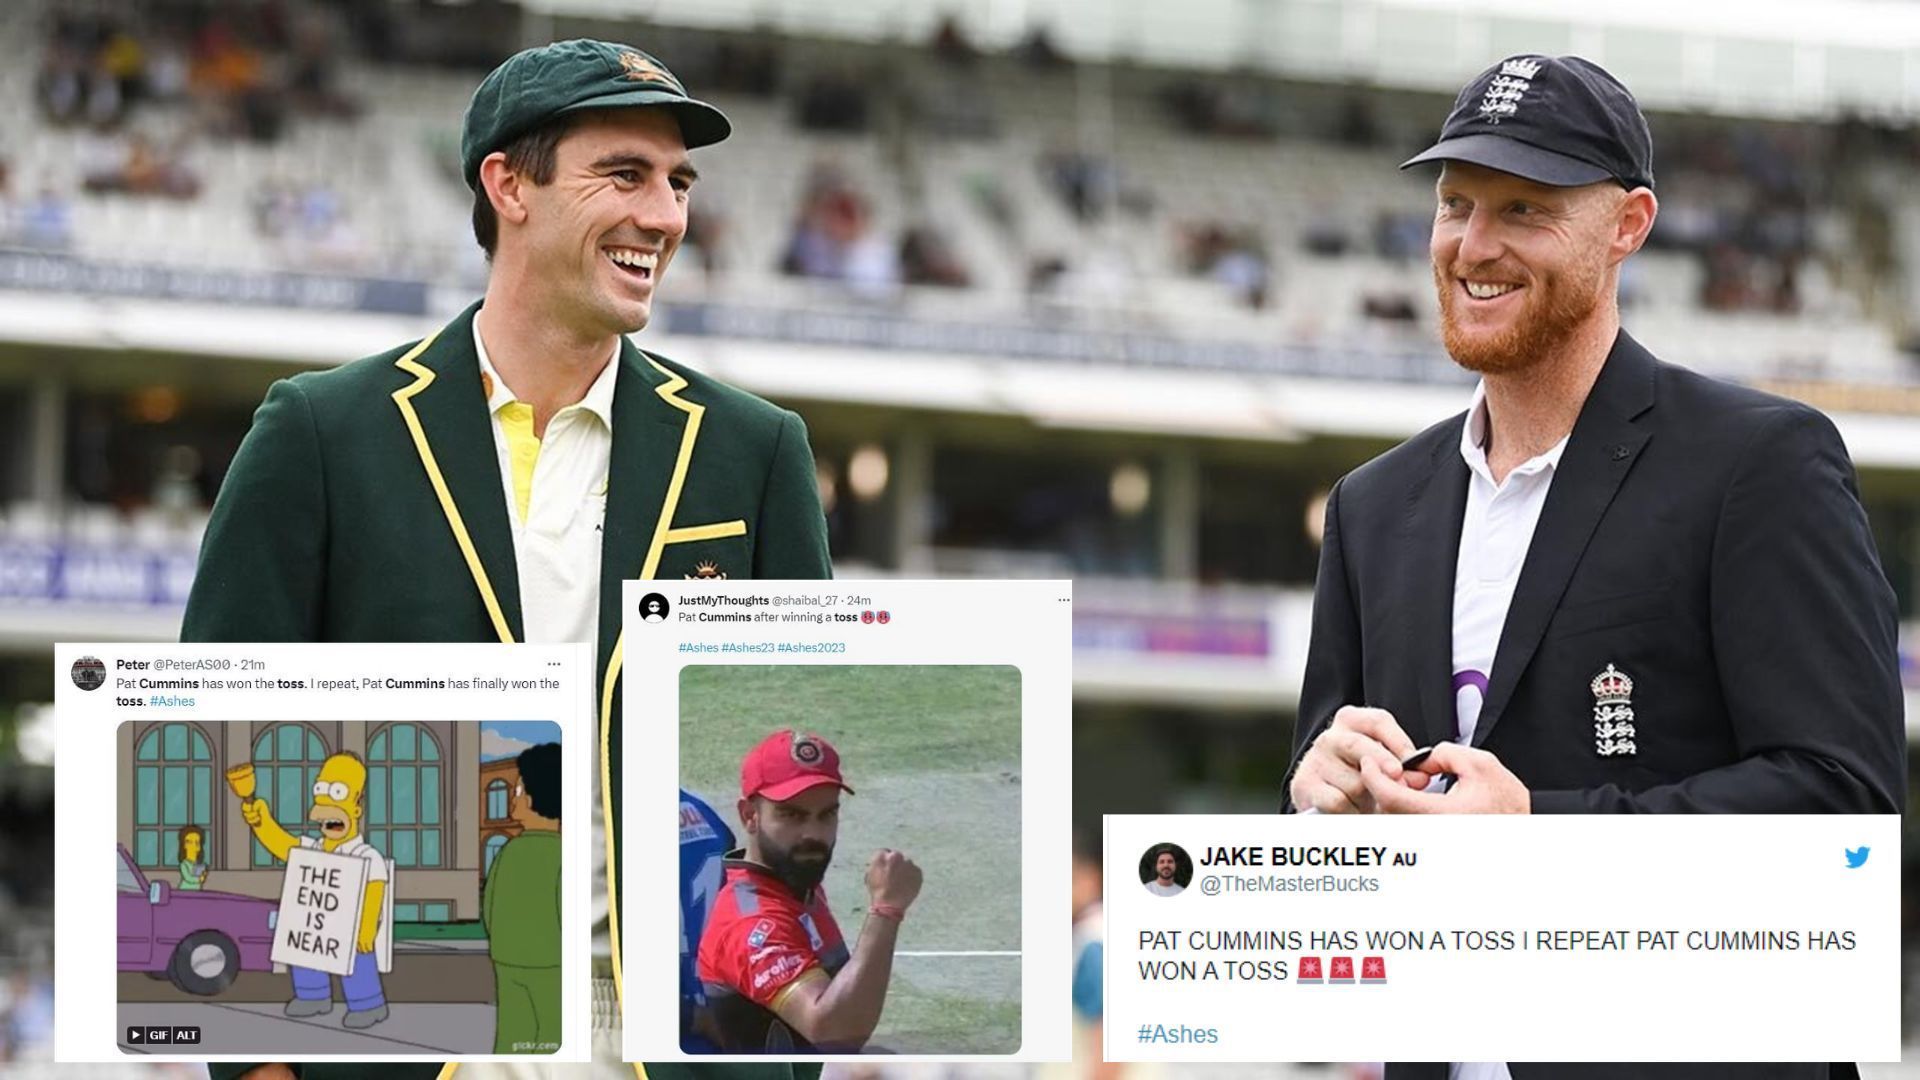 &quot;This series never ceases to come up with something new&quot; - Twitter reacts as Pat Cummins finally wins the toss in the 2023 Ashes 